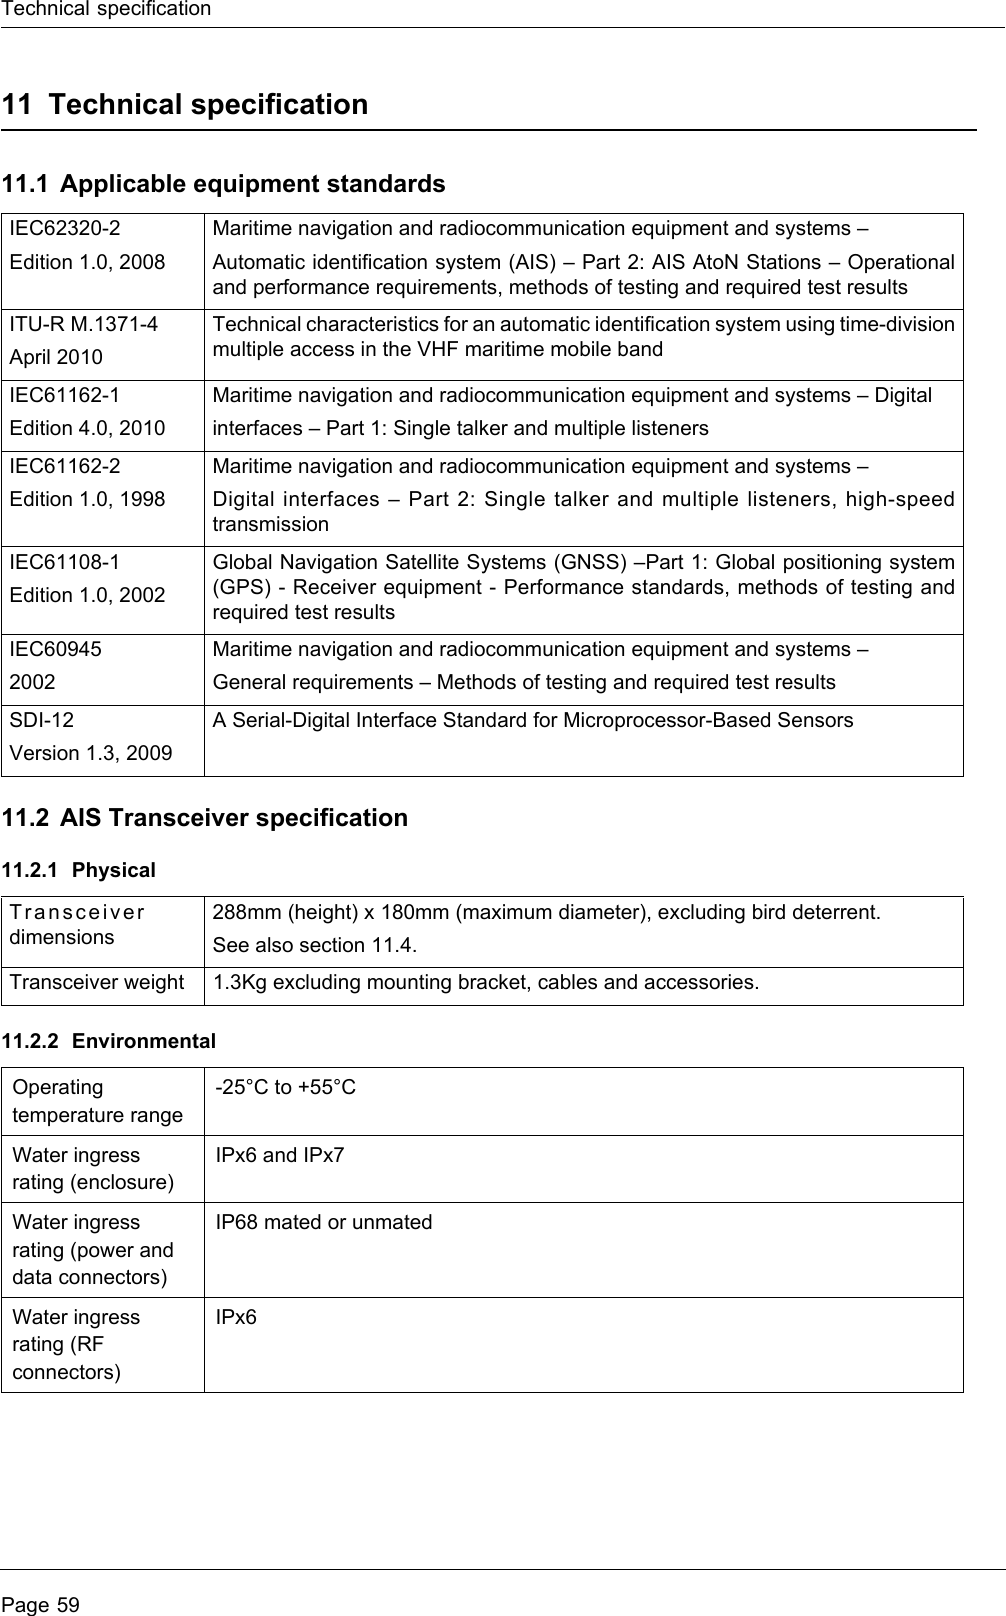 Technical specificationPage 5911 Technical specification11.1 Applicable equipment standards11.2 AIS Transceiver specification11.2.1 Physical11.2.2 EnvironmentalIEC62320-2Edition 1.0, 2008Maritime navigation and radiocommunication equipment and systems –Automatic identification system (AIS) – Part 2: AIS AtoN Stations – Operational and performance requirements, methods of testing and required test resultsITU-R M.1371-4April 2010Technical characteristics for an automatic identification system using time-division multiple access in the VHF maritime mobile bandIEC61162-1Edition 4.0, 2010Maritime navigation and radiocommunication equipment and systems – Digitalinterfaces – Part 1: Single talker and multiple listenersIEC61162-2Edition 1.0, 1998Maritime navigation and radiocommunication equipment and systems –Digital interfaces – Part 2: Single talker and multiple listeners, high-speed transmissionIEC61108-1Edition 1.0, 2002Global Navigation Satellite Systems (GNSS) –Part 1: Global positioning system (GPS) - Receiver equipment - Performance standards, methods of testing and required test resultsIEC60945 2002Maritime navigation and radiocommunication equipment and systems –General requirements – Methods of testing and required test resultsSDI-12Version 1.3, 2009A Serial-Digital Interface Standard for Microprocessor-Based SensorsTransceiver dimensions288mm (height) x 180mm (maximum diameter), excluding bird deterrent.See also section 11.4.Transceiver weight 1.3Kg excluding mounting bracket, cables and accessories.Operating temperature range-25°C to +55°CWater ingress rating (enclosure)IPx6 and IPx7Water ingress rating (power and data connectors)IP68 mated or unmatedWater ingress rating (RF connectors)IPx6